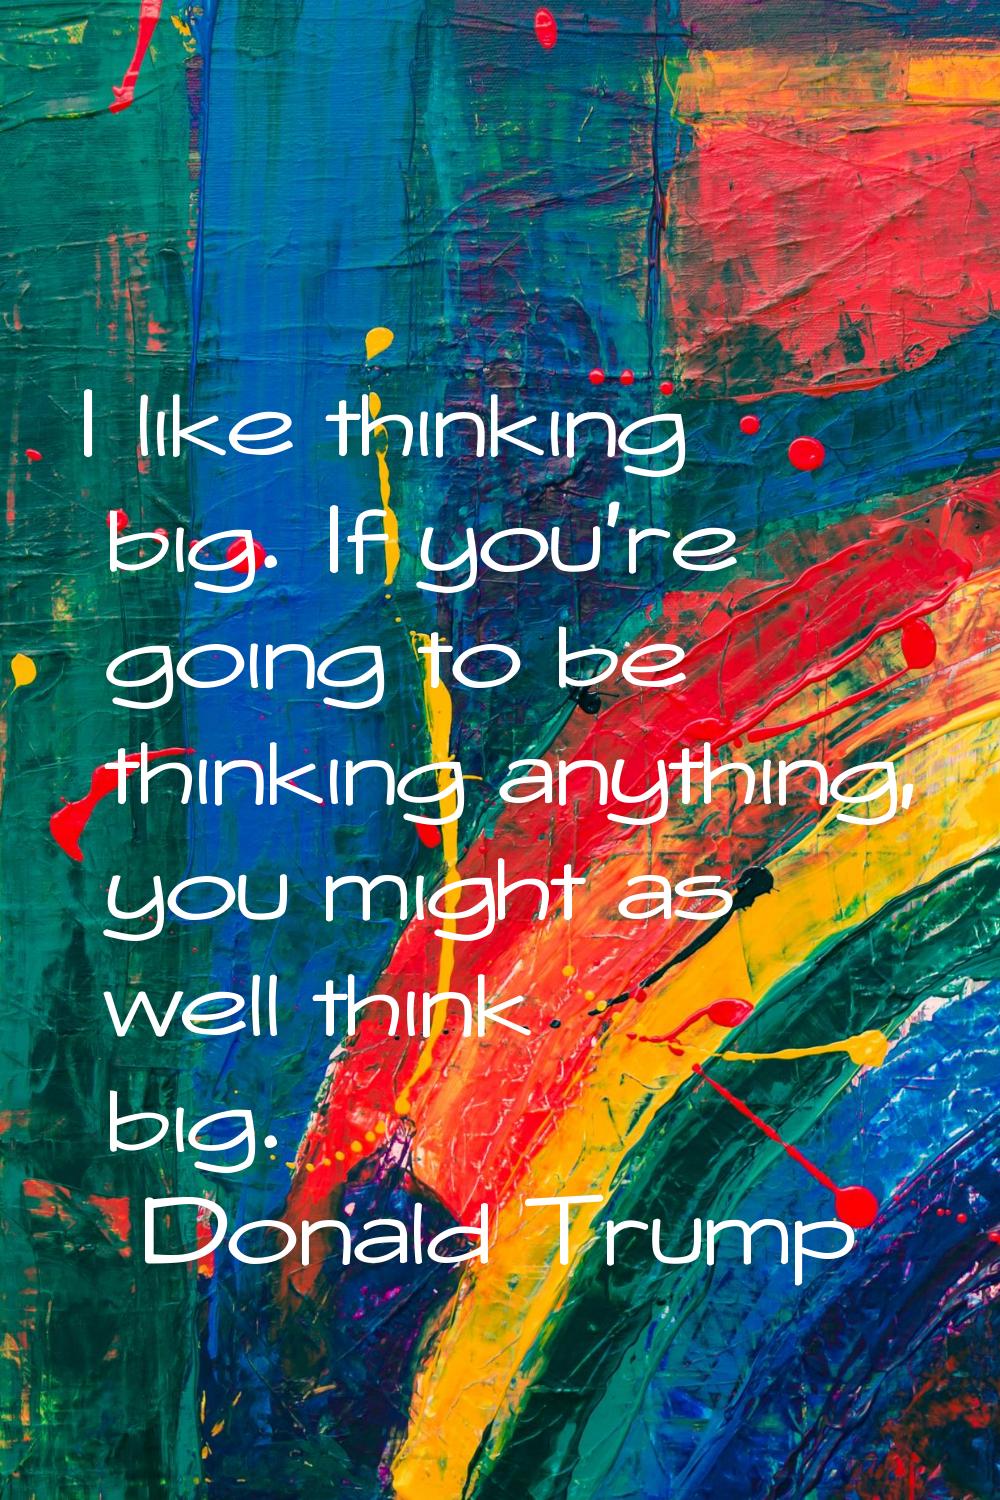 I like thinking big. If you're going to be thinking anything, you might as well think big.